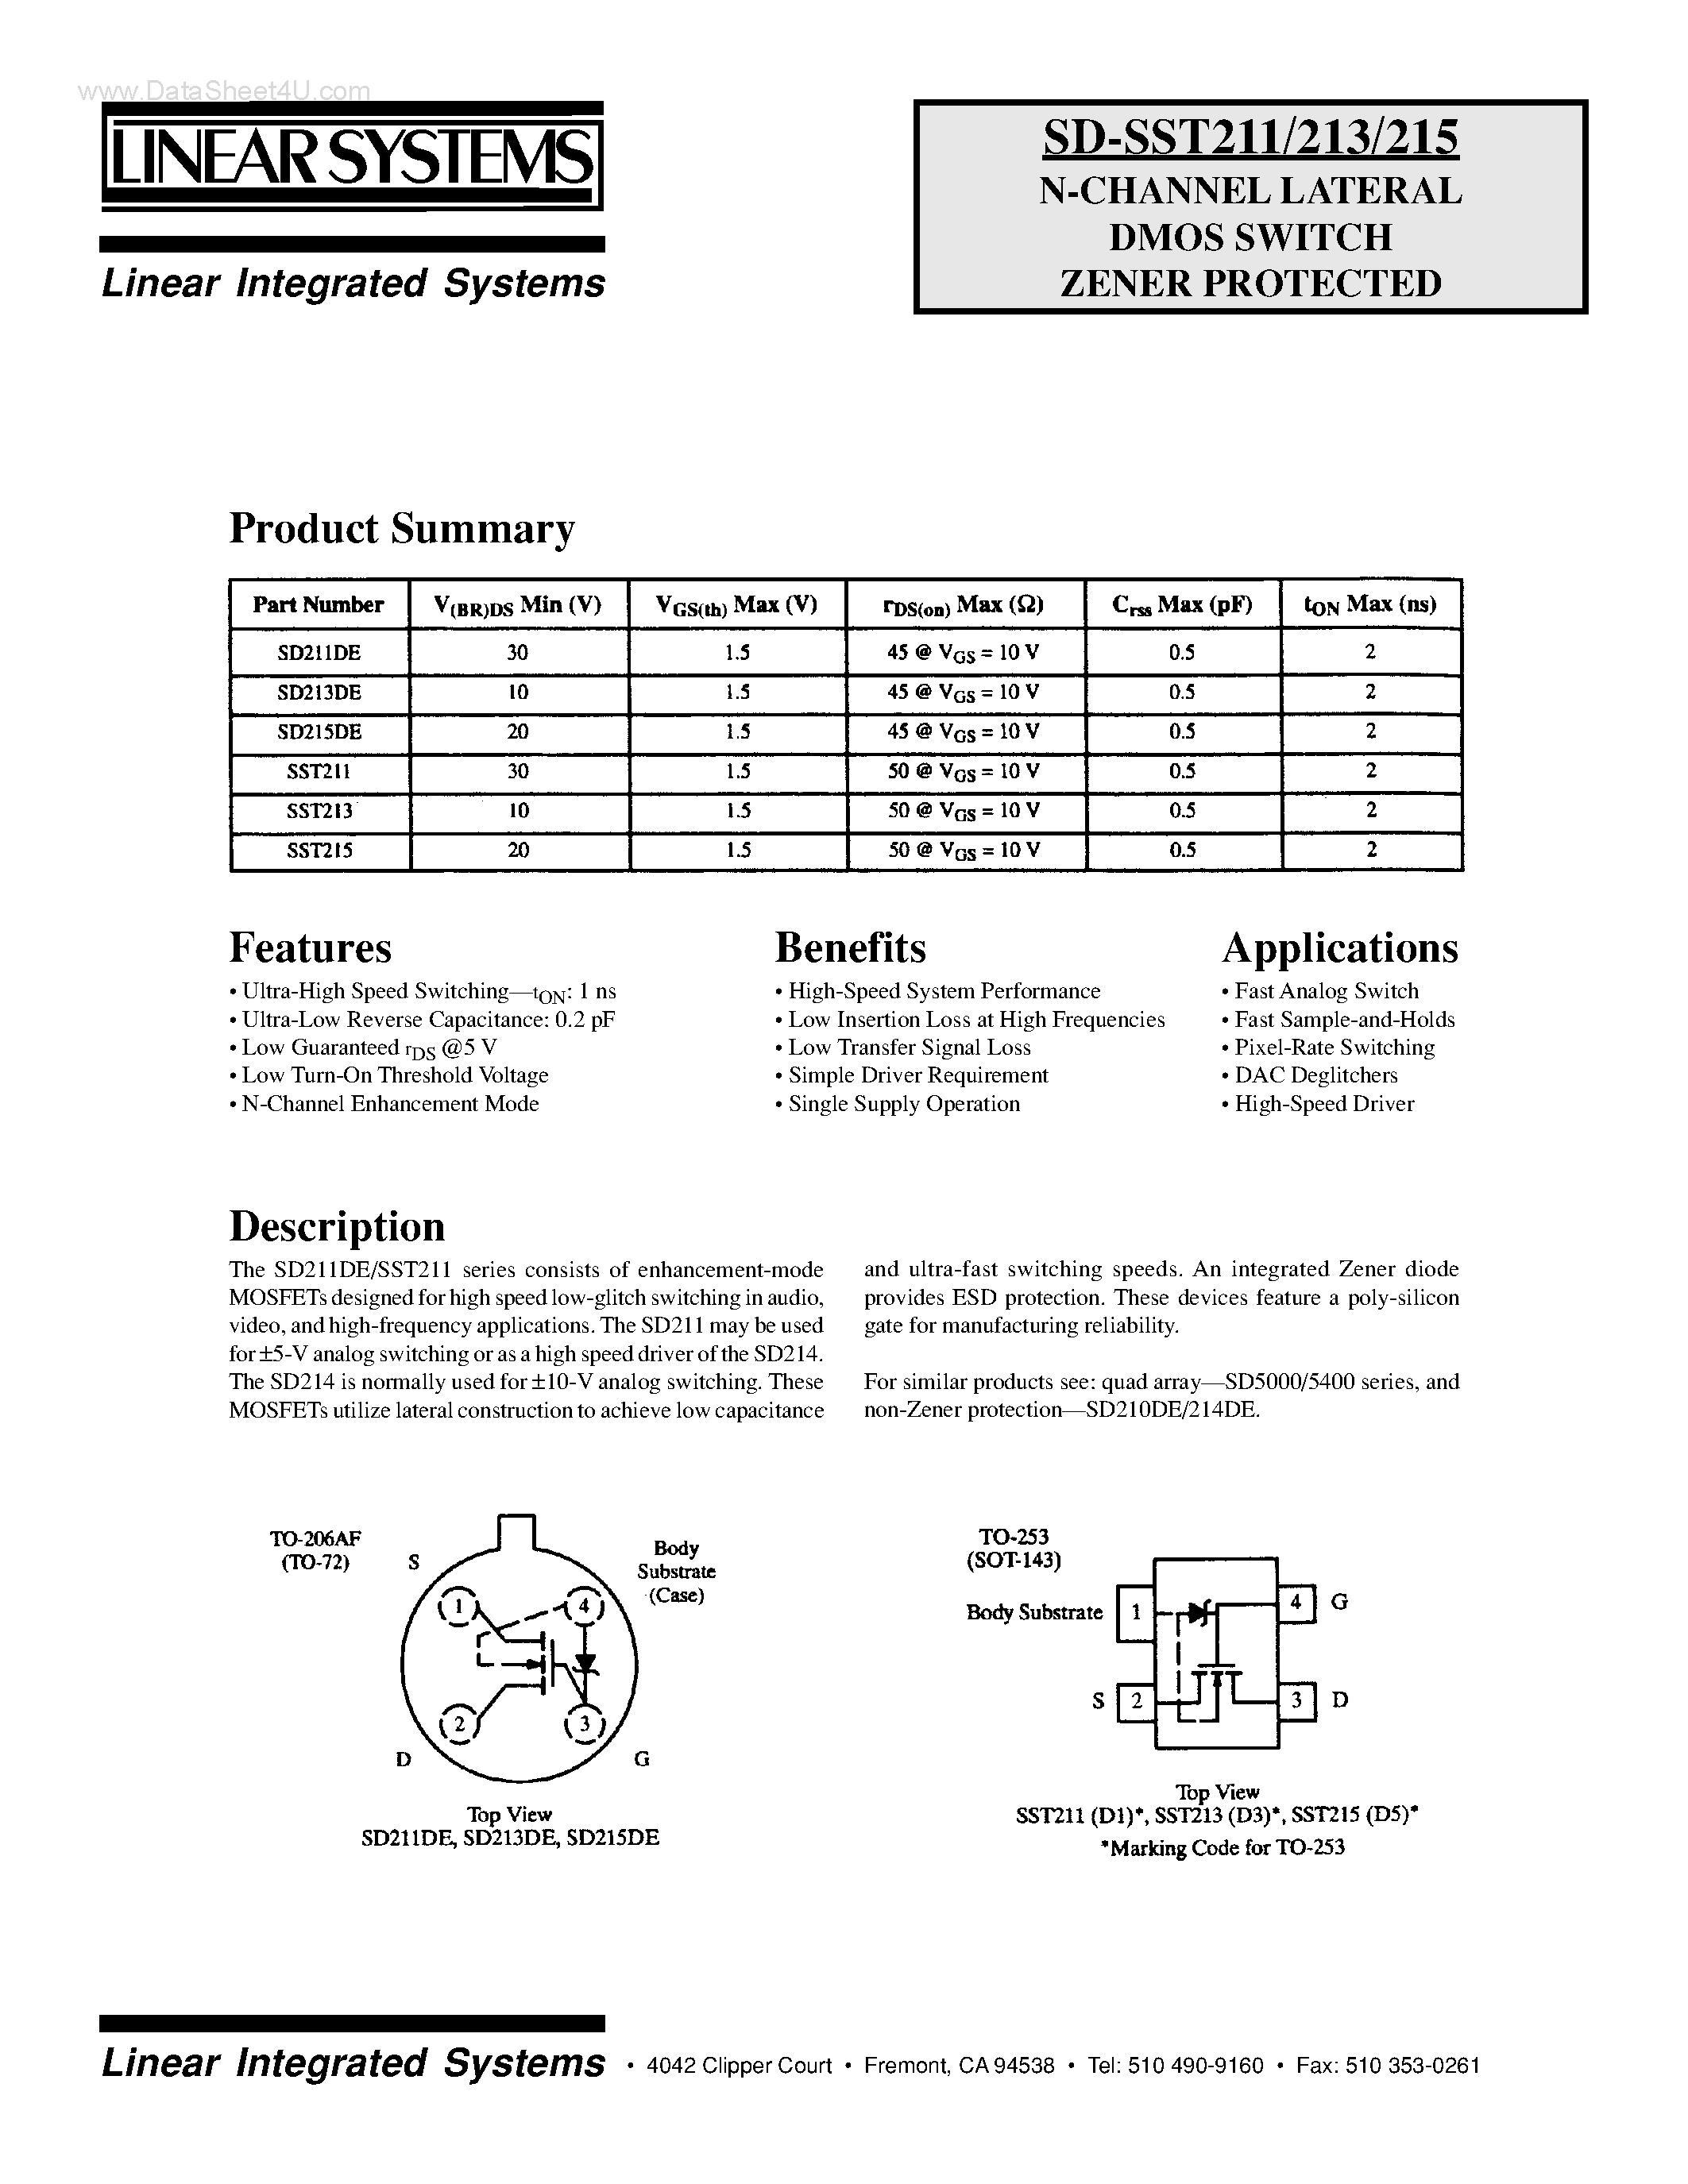 Datasheet SD211 - (SD211 - SD215) N-CHANNEL LATERAL DMOS SWITCH ZENER PROTECTED page 1